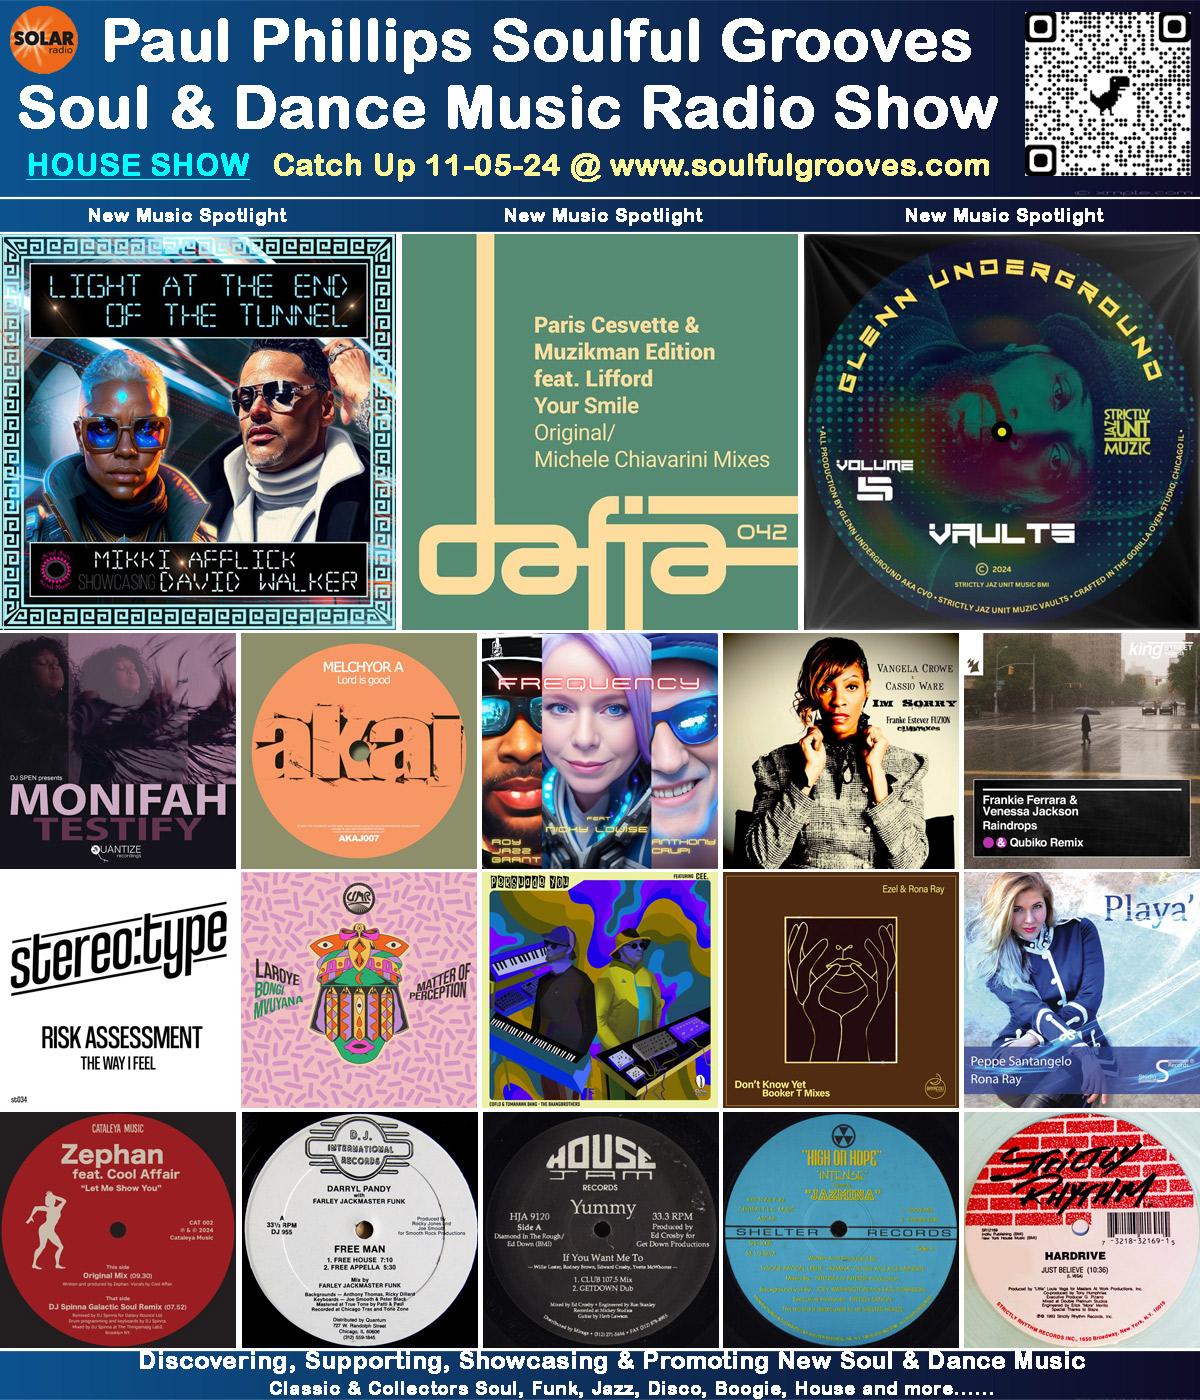 Paul Phillips Soulful Grooves Solar Radio House Music Show Playlist playing soulful house, deep house, classic house